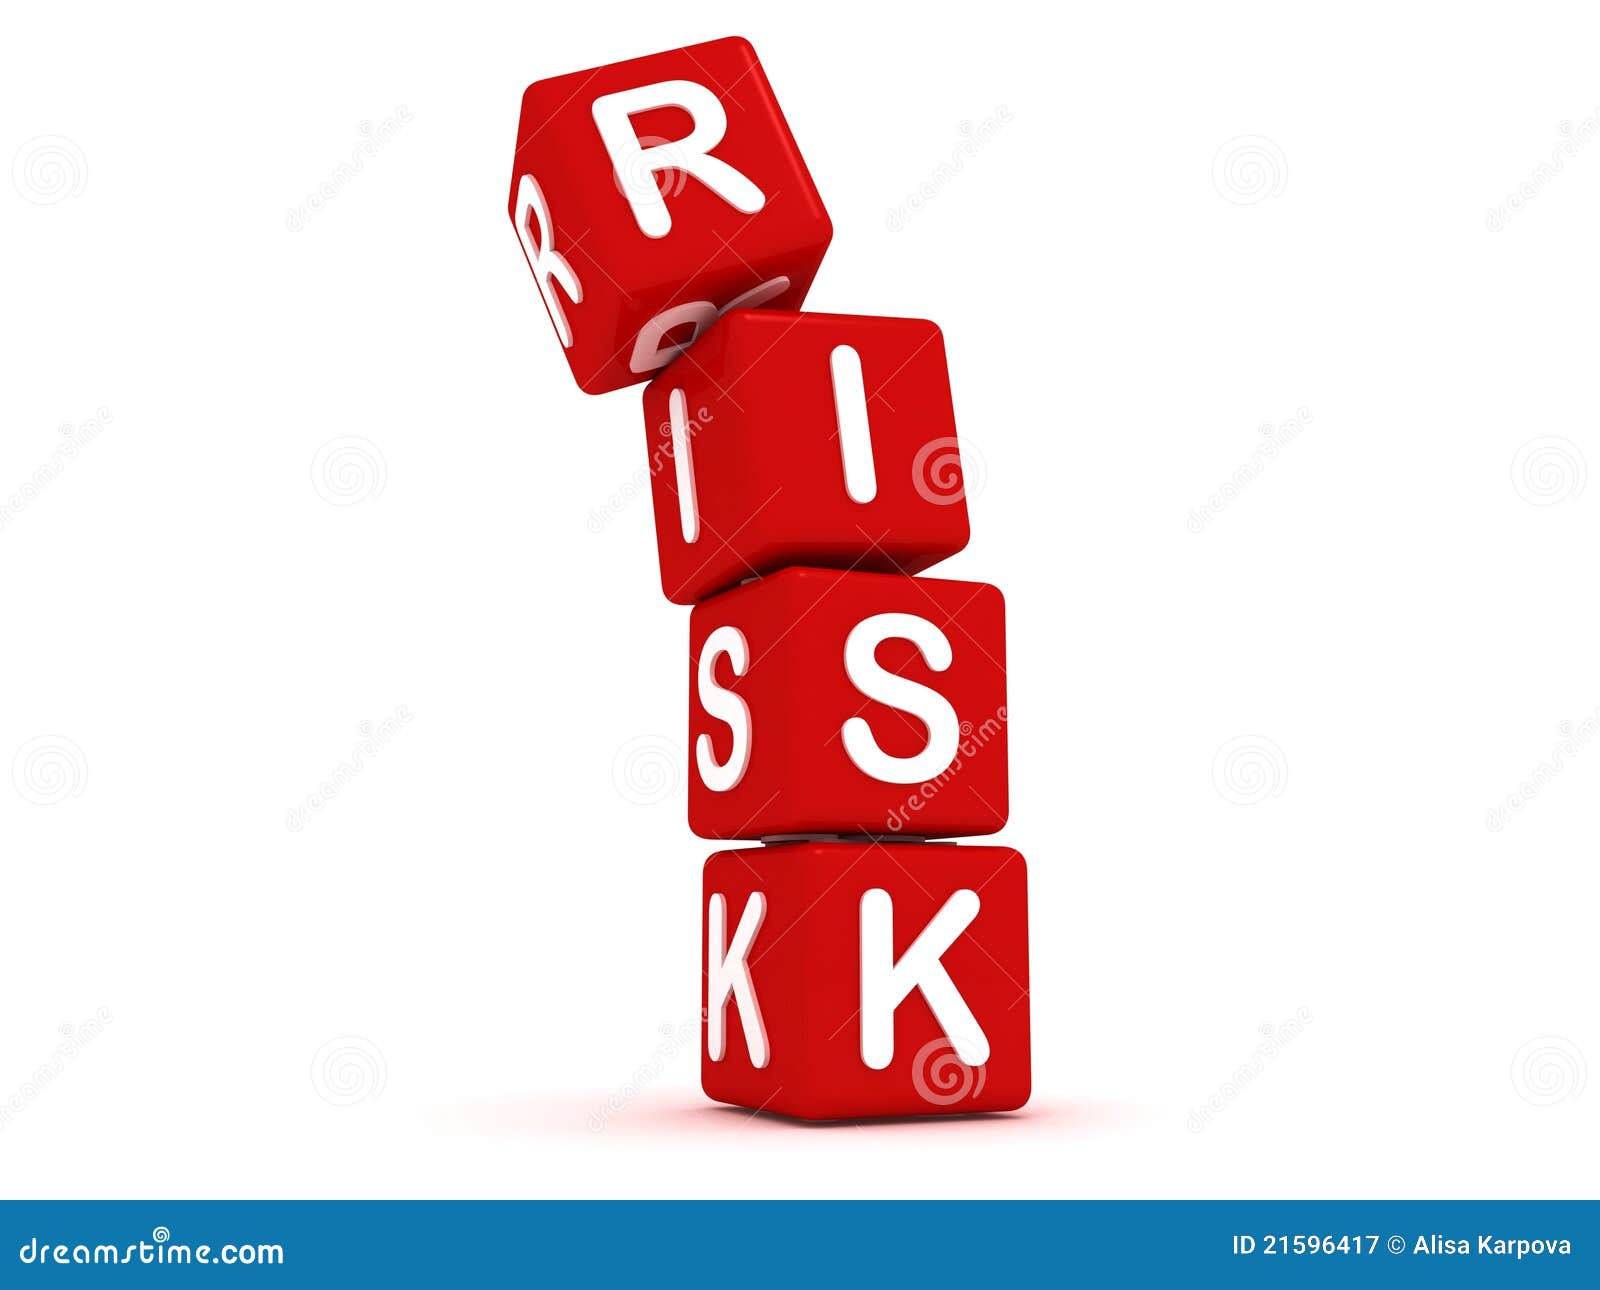 Risk Concept with Red Cubes Stock Illustration - Illustration of themes ...